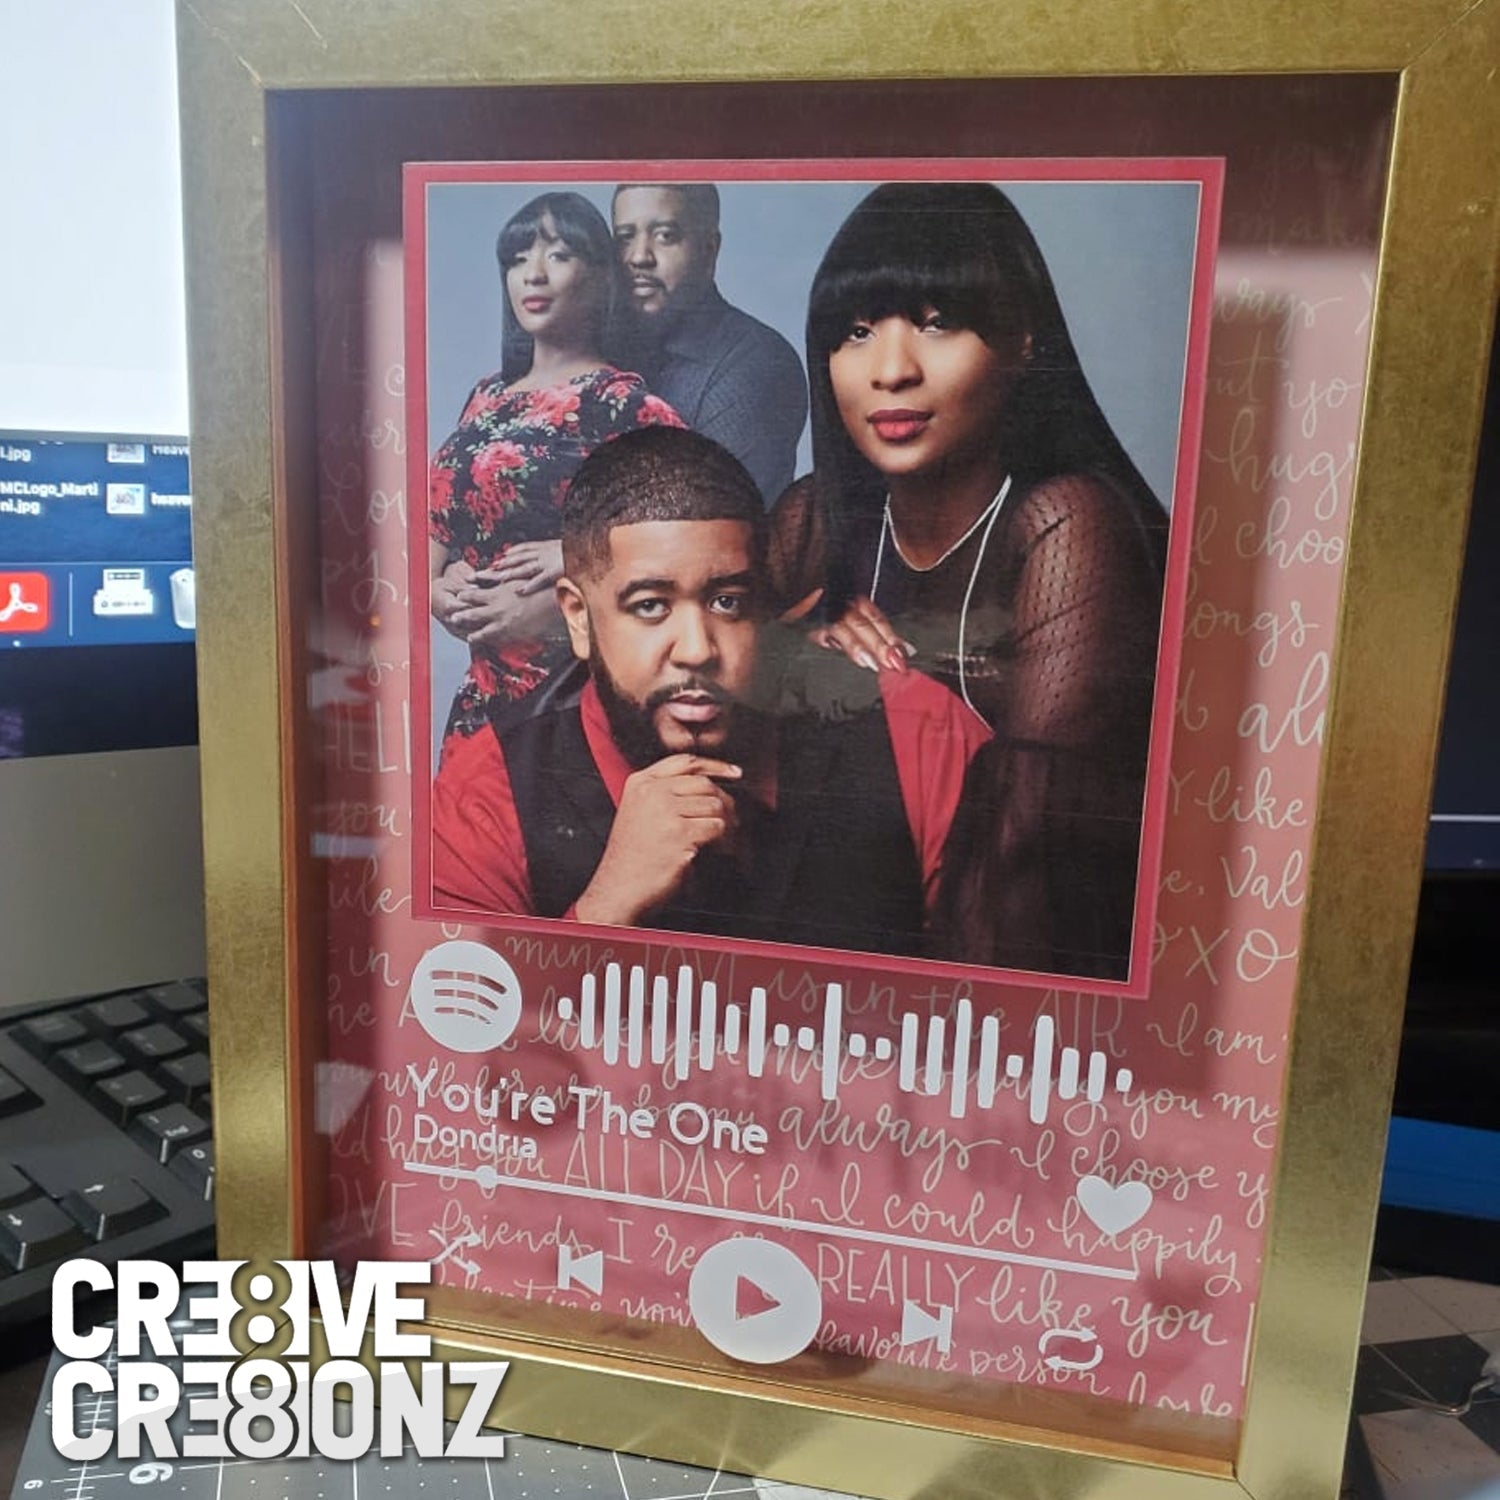 Custom Spotify Plaque - Cre8ive Cre8ionz